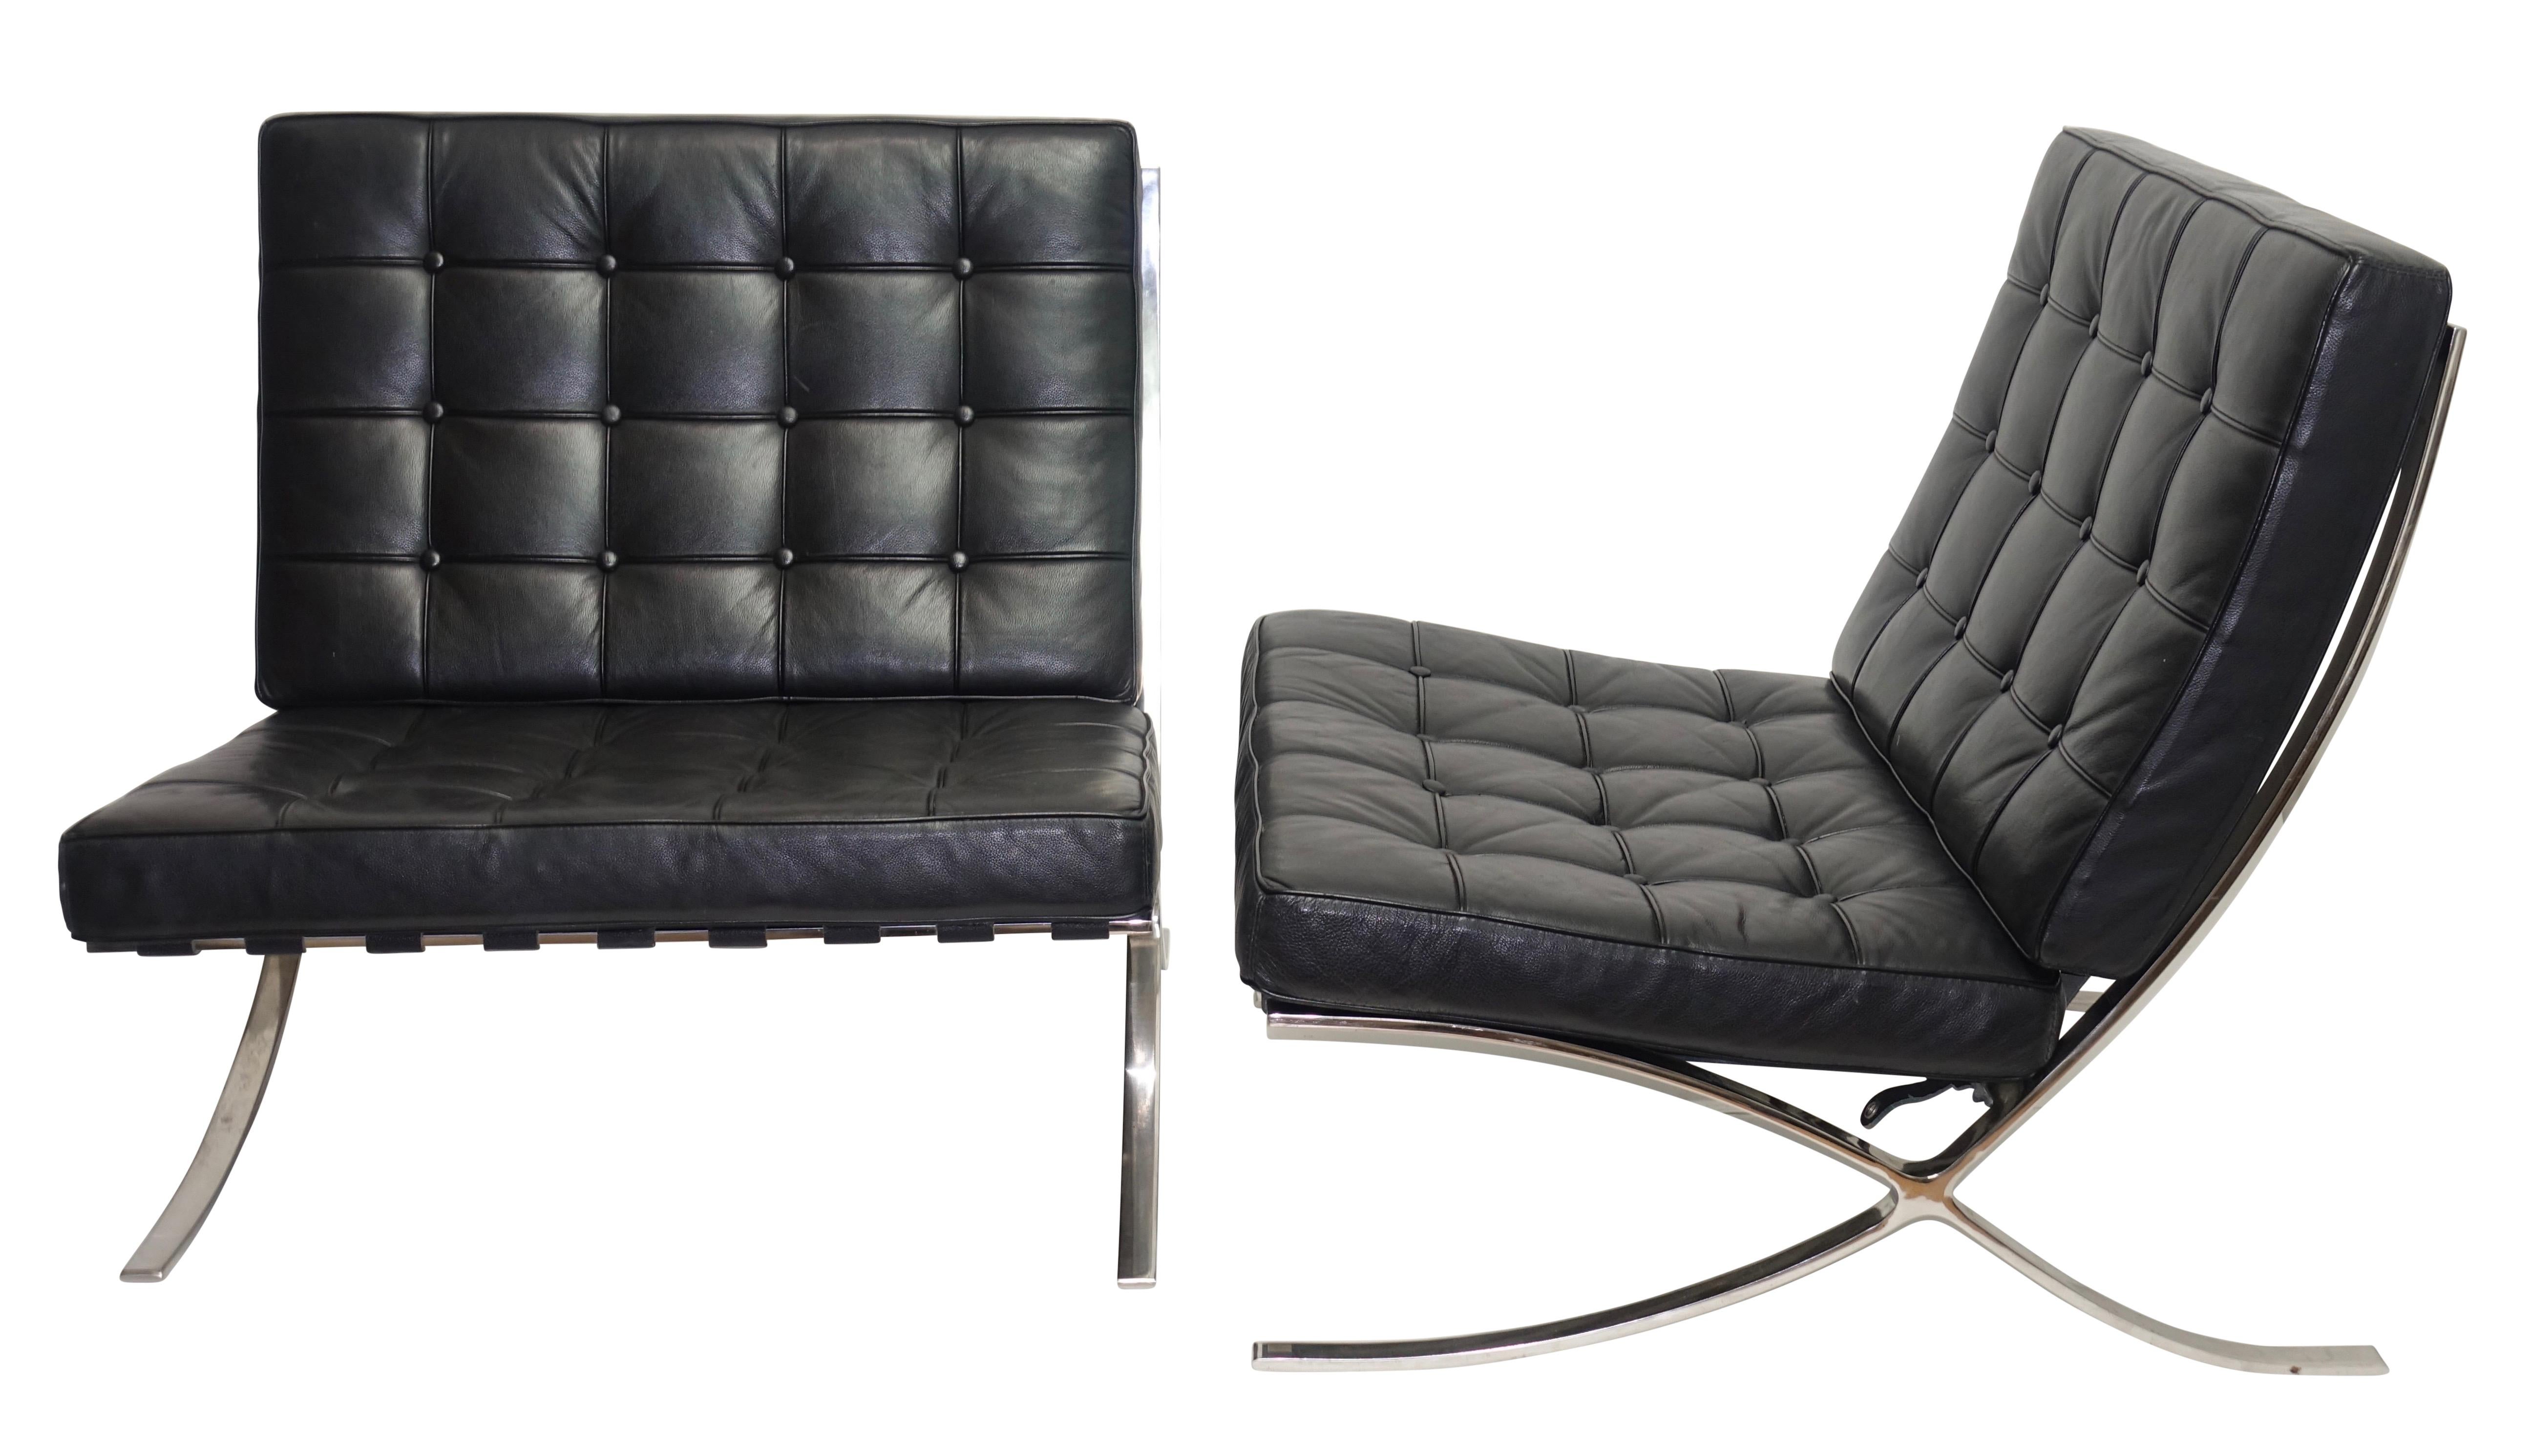 Two classic midcentury style Mies van der Rohe for Knoll Studio Barcelona style chairs with Spinneybeck black leather cushions and stainless steel frames. These chairs do not have tags or labels. American, last quarter of the 20th century.
Will sell